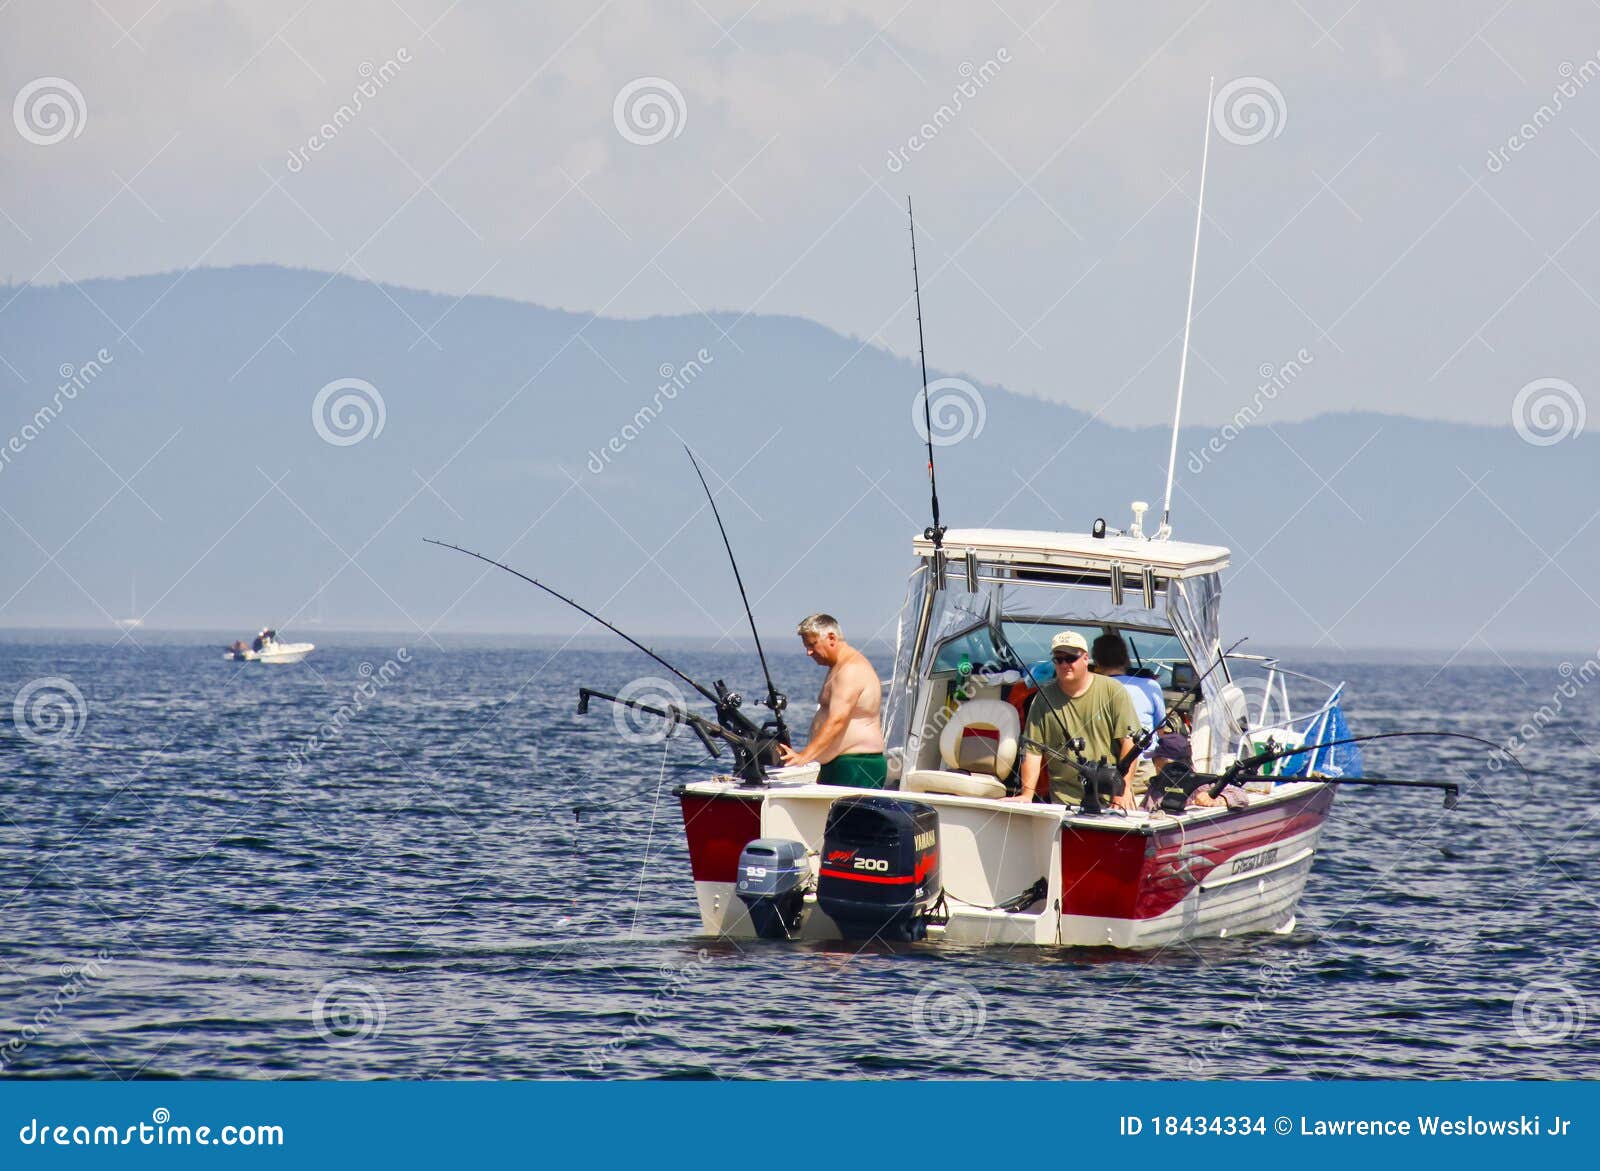 Fishermen on a recreational fishing boat looking for salmon and lake 